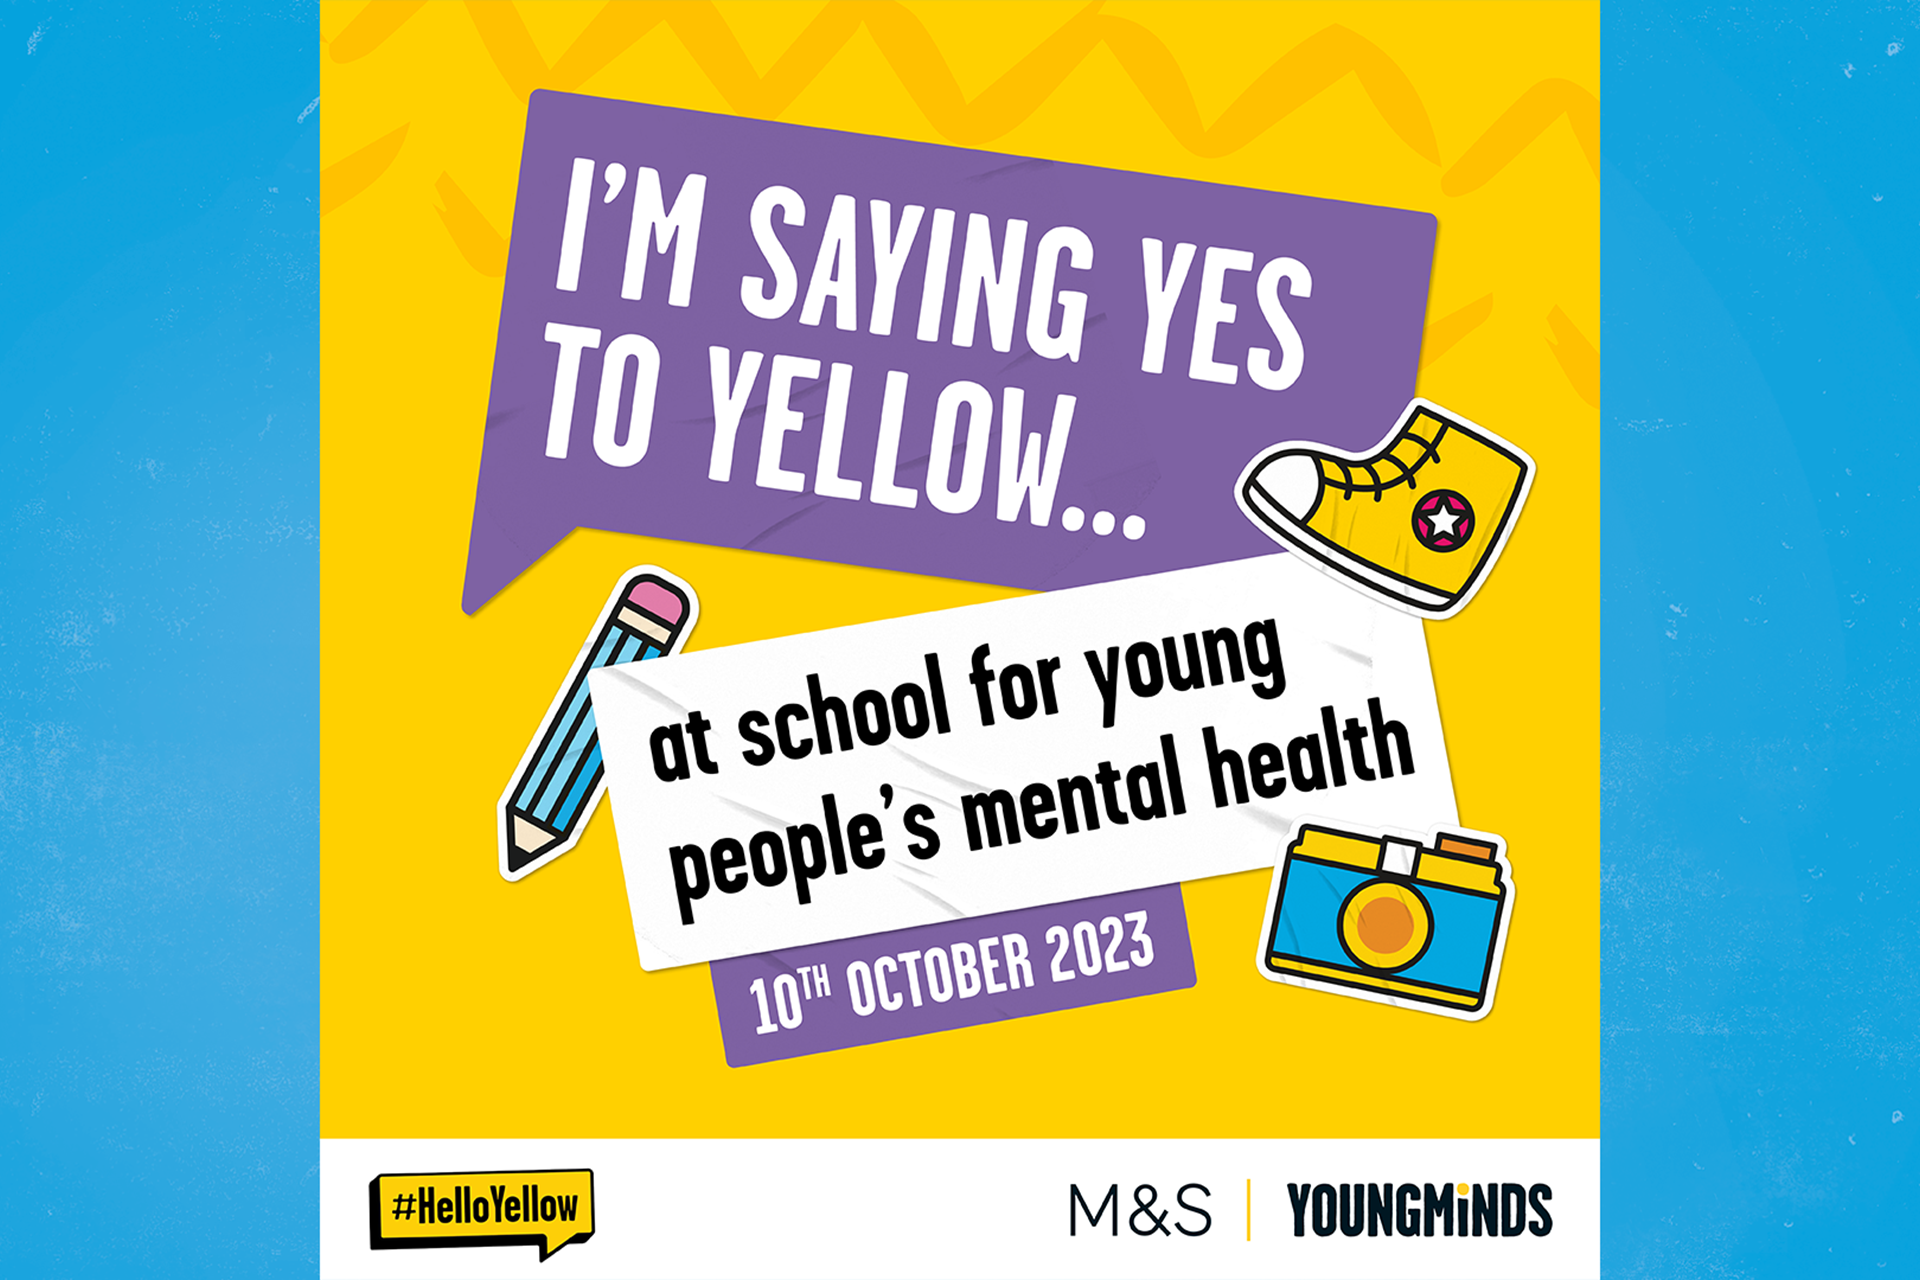 Preview of the resource: social media post for schools. Text reads: I'm saying yes to yellow... at school for young people's mental health. 10th October 2023.